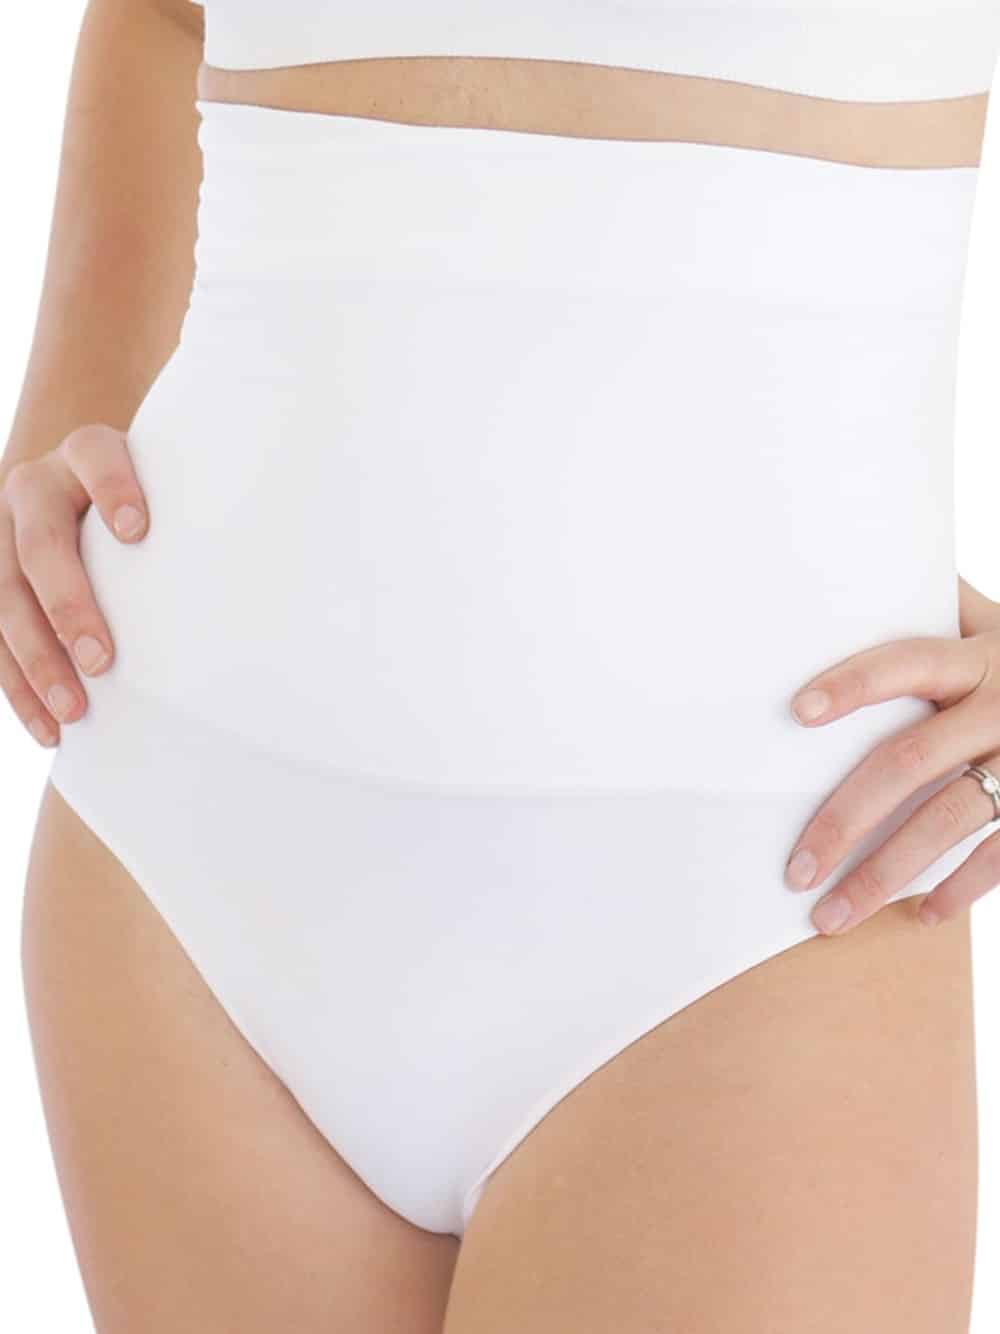 Post Natal Support Pants white Jojomamanbebe A9564, Maternity & More, Maternity Wear